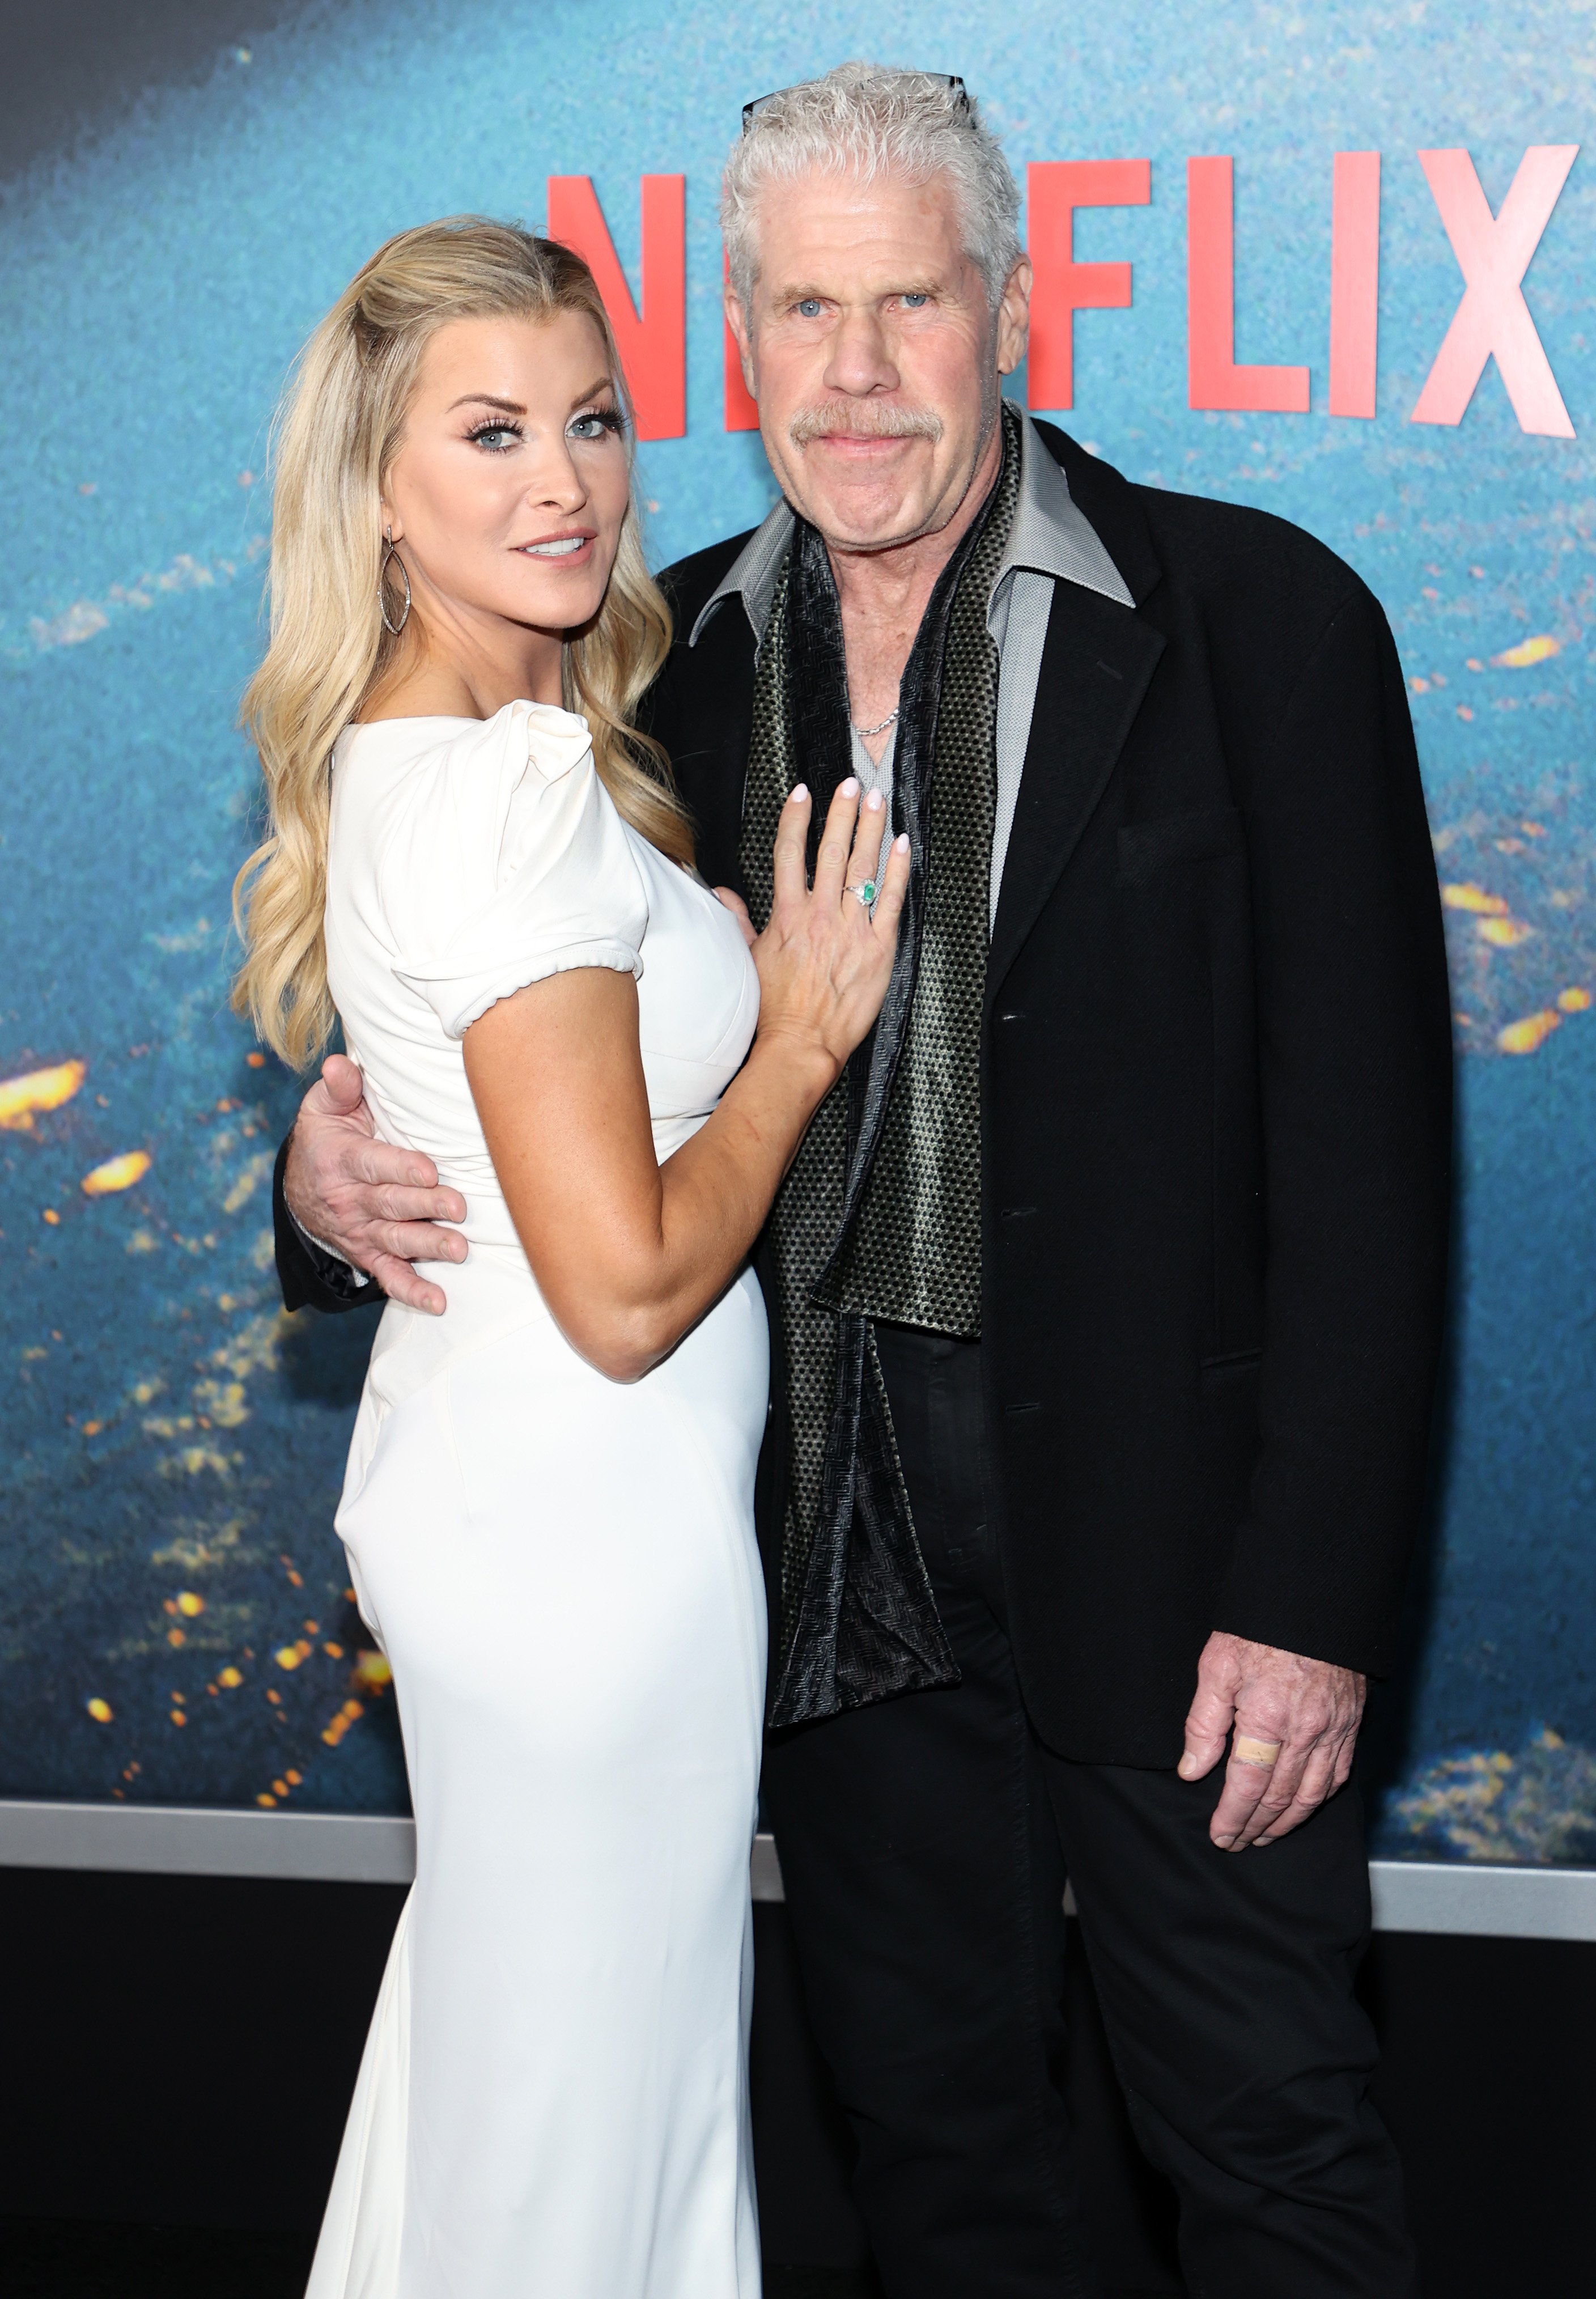 Ron Perlman and Allison Dunbar at the world premiere of "Don't Look Up" on December 5, 2021, in New York City. | Source: Getty Images